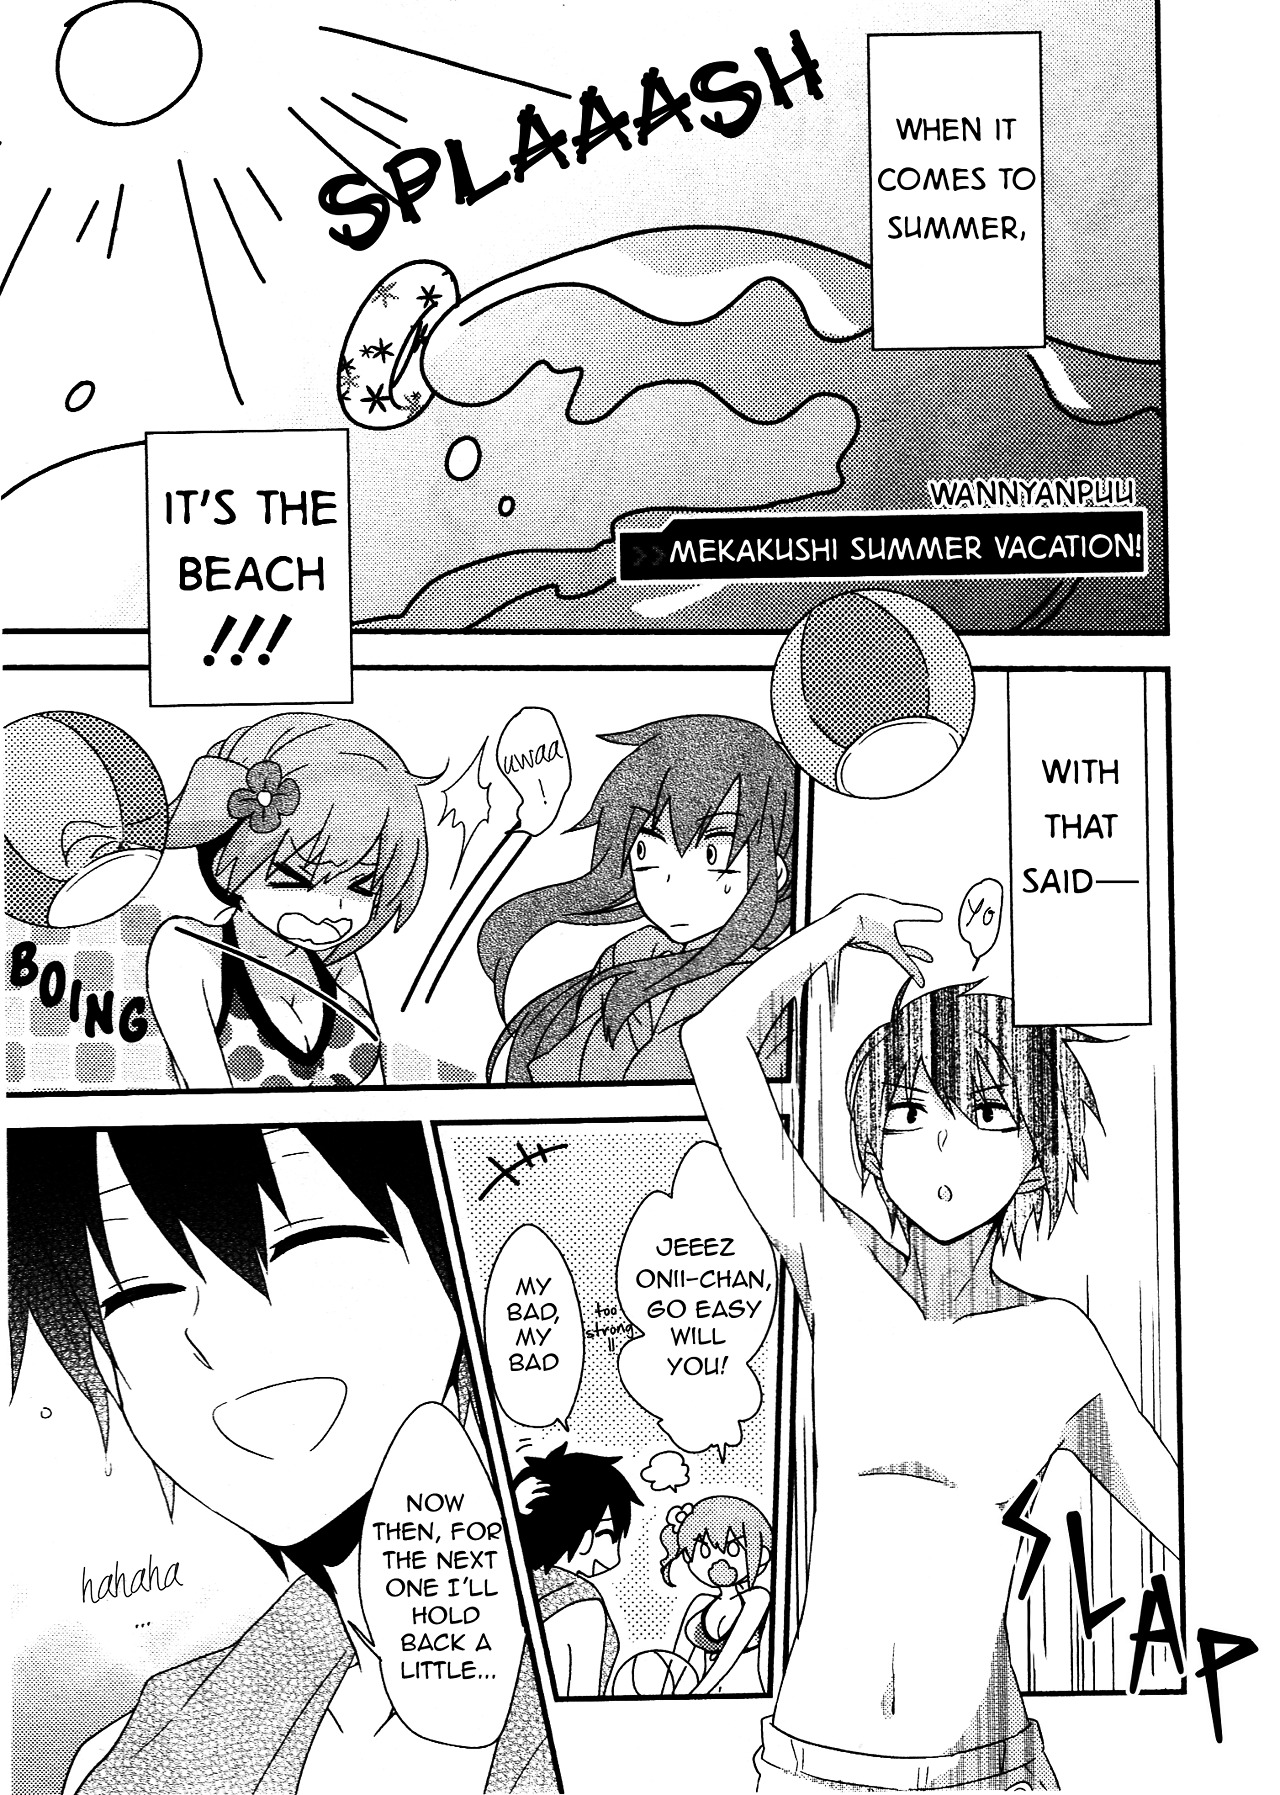 Kagerou Daze Official Anthology Comic -Summer- Vol.1 Chapter 13 : Mekakushi Summer Vacation! By Wannyanpuu [End] - Picture 1